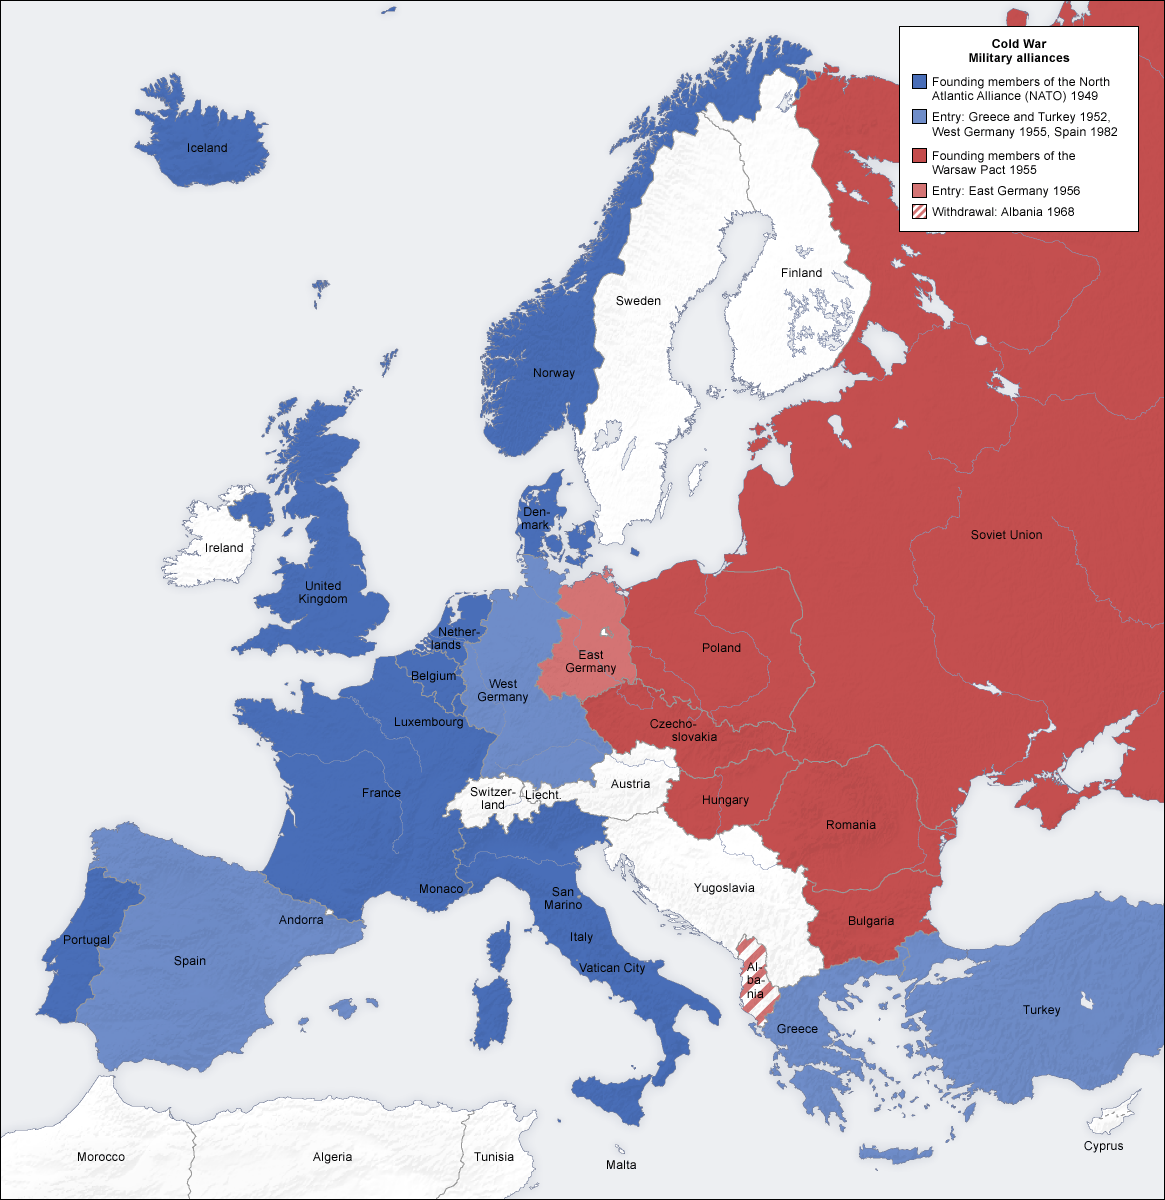 Map Of Europe And Asia During The Cold War